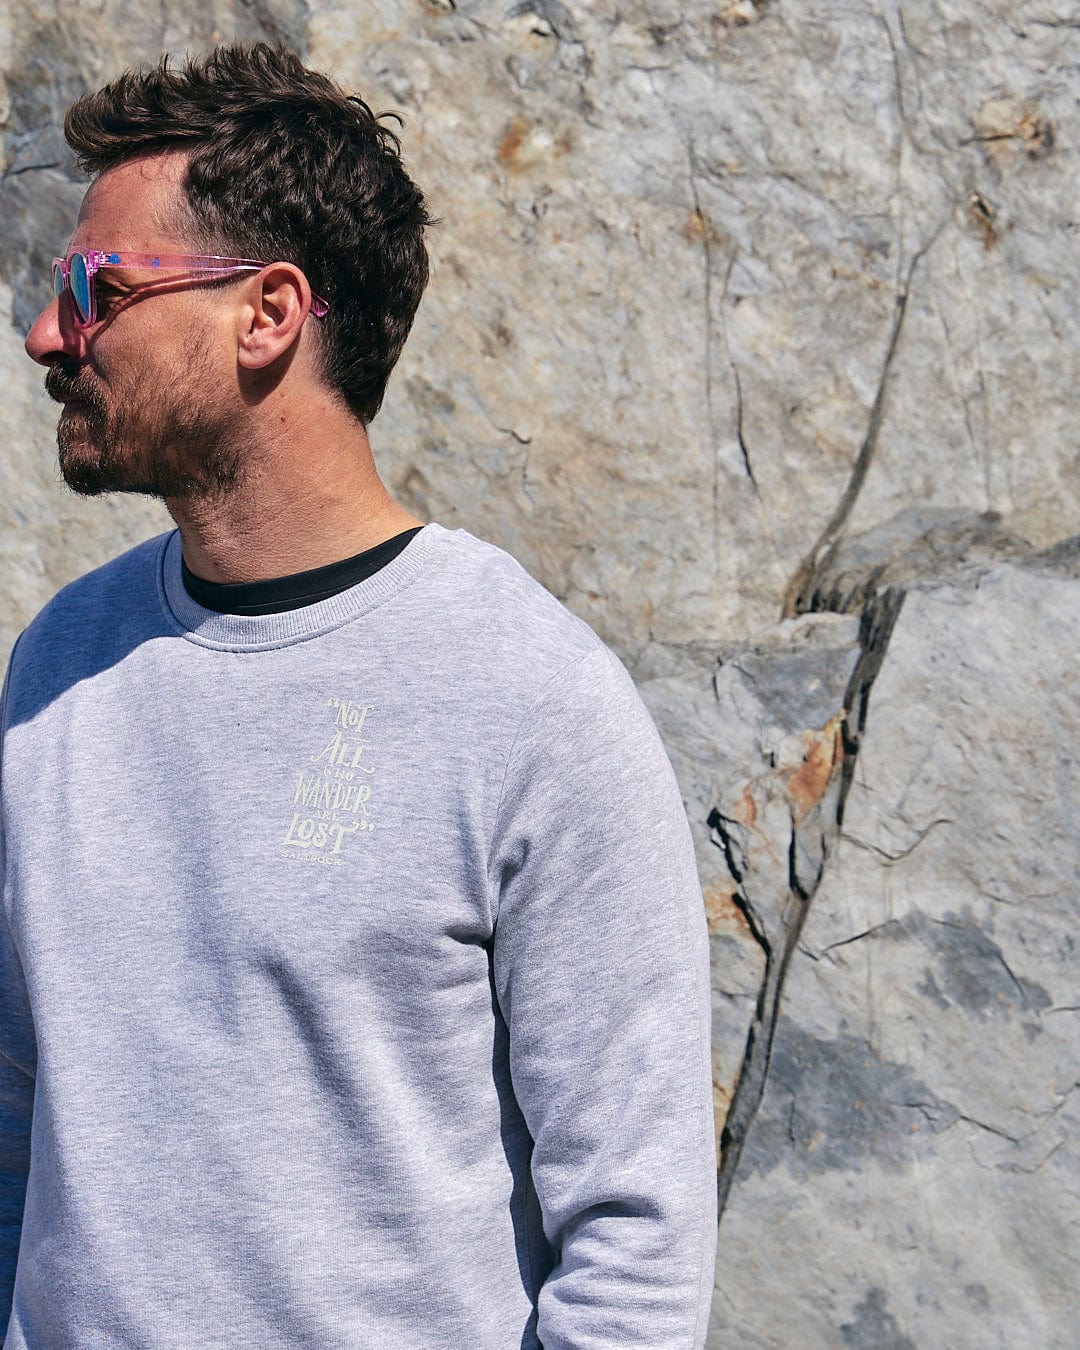 A man wearing Lost Ships - Mens Crew Sweat - Grey by Saltrock, sunglasses, and a grey sweatshirt in front of a rock.